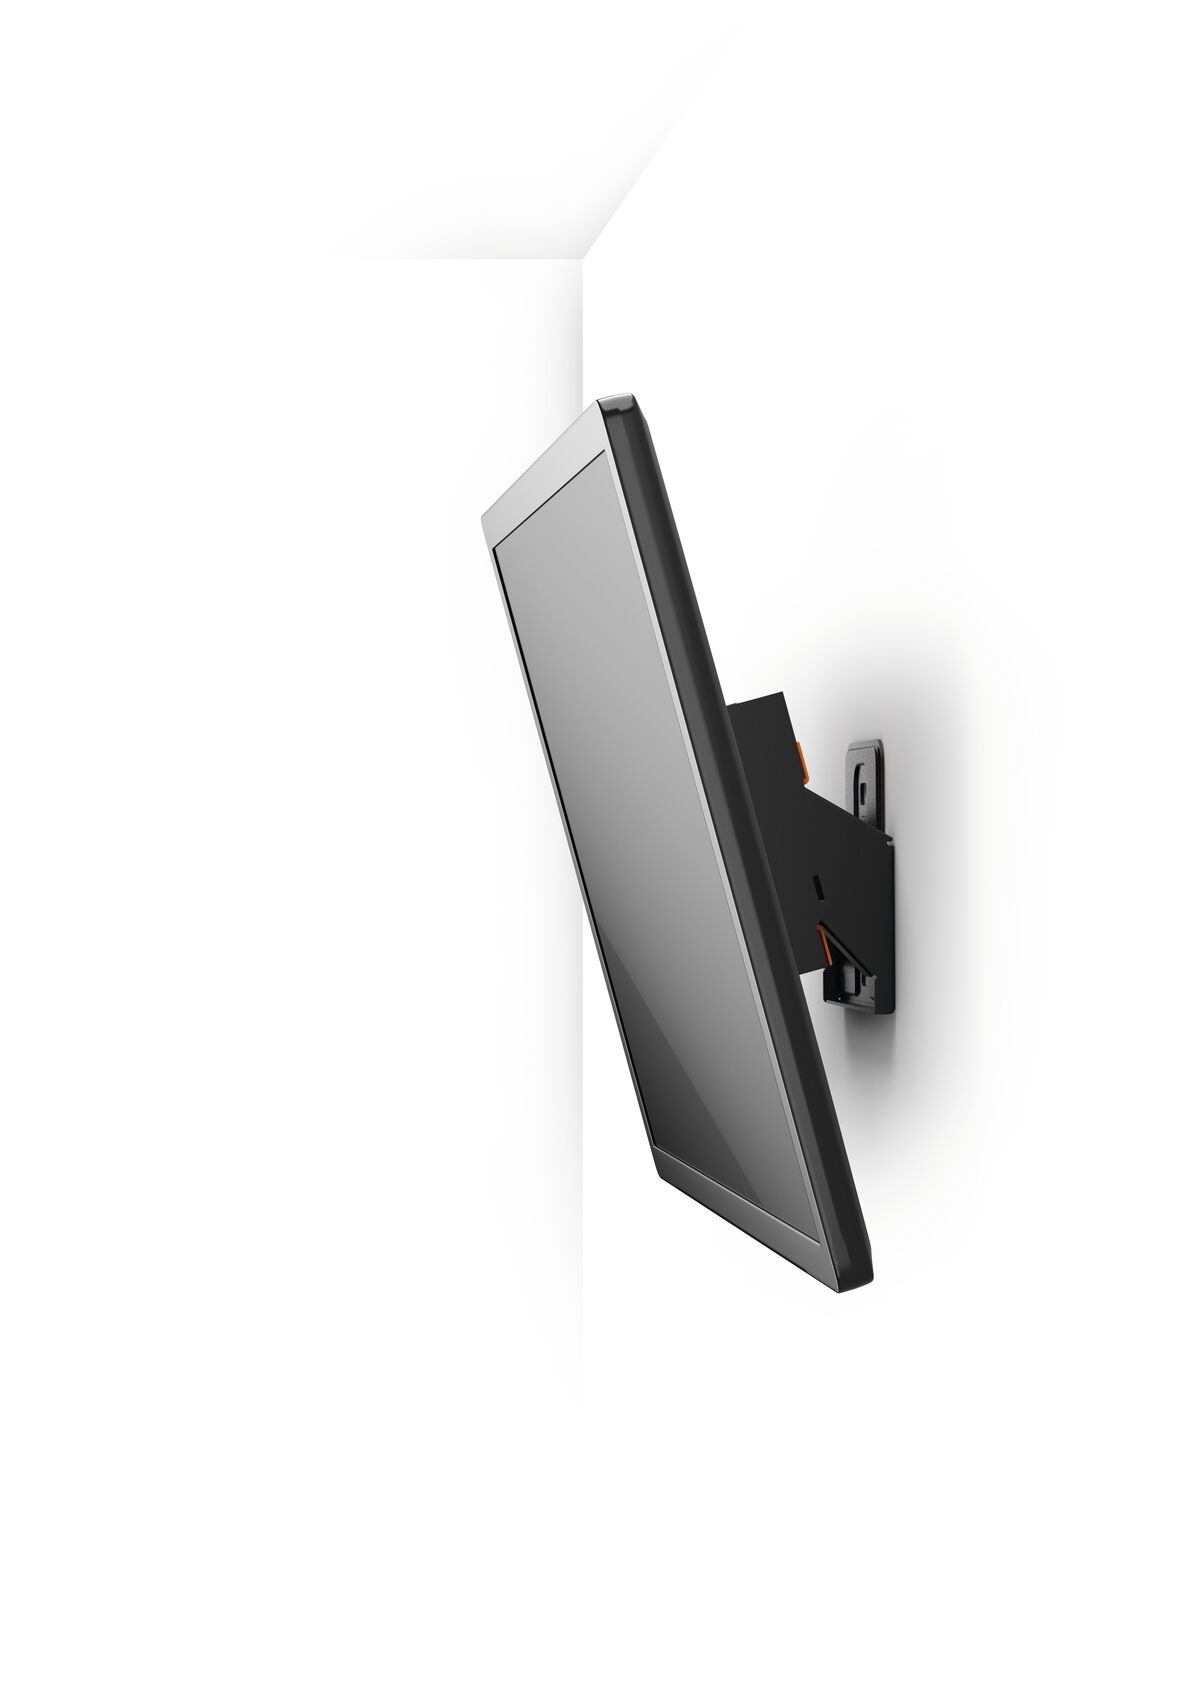 Vogel's WALL 2015 Tilting TV Wall Mount - Suitable for 17 up to 26 inch TVs up to Tilt up to 15° - White wall